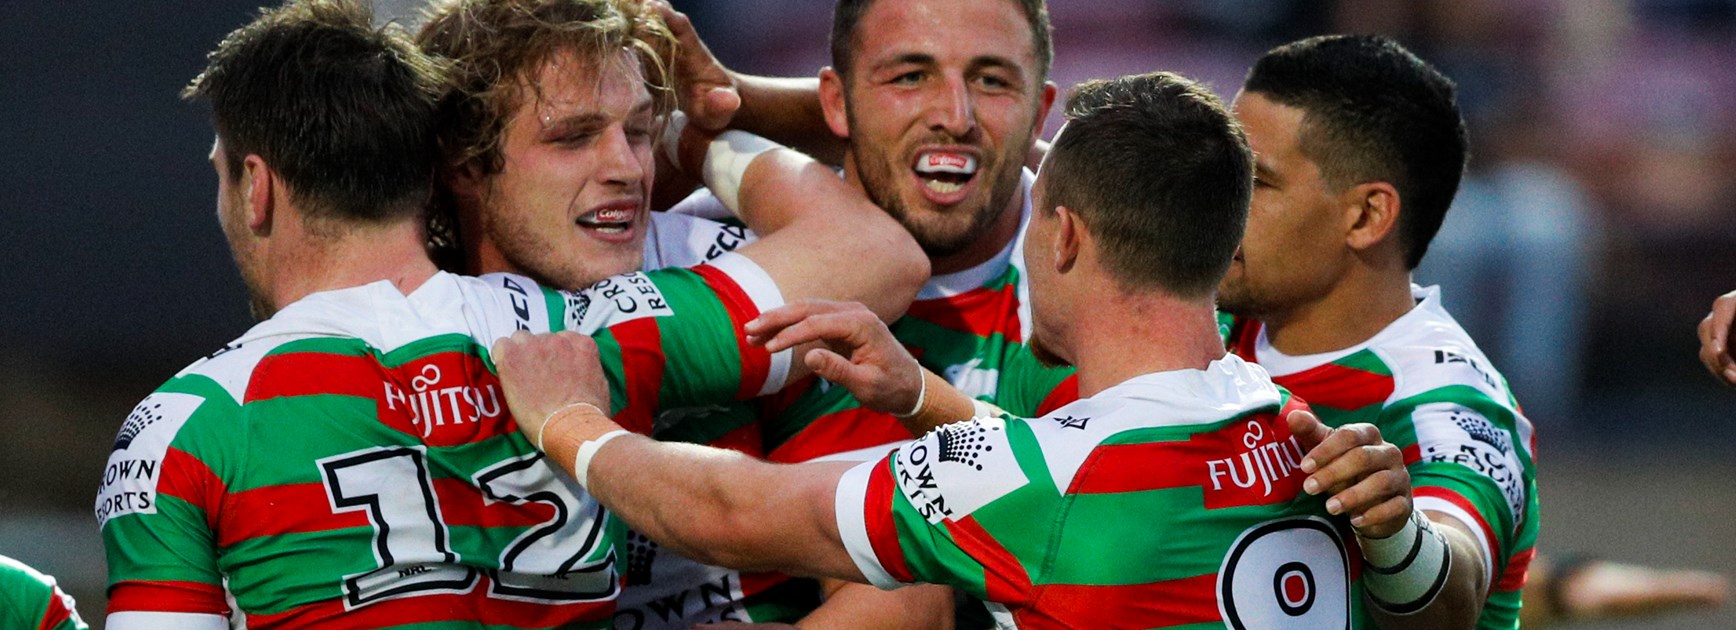 The Rabbitohs celebrate a try.